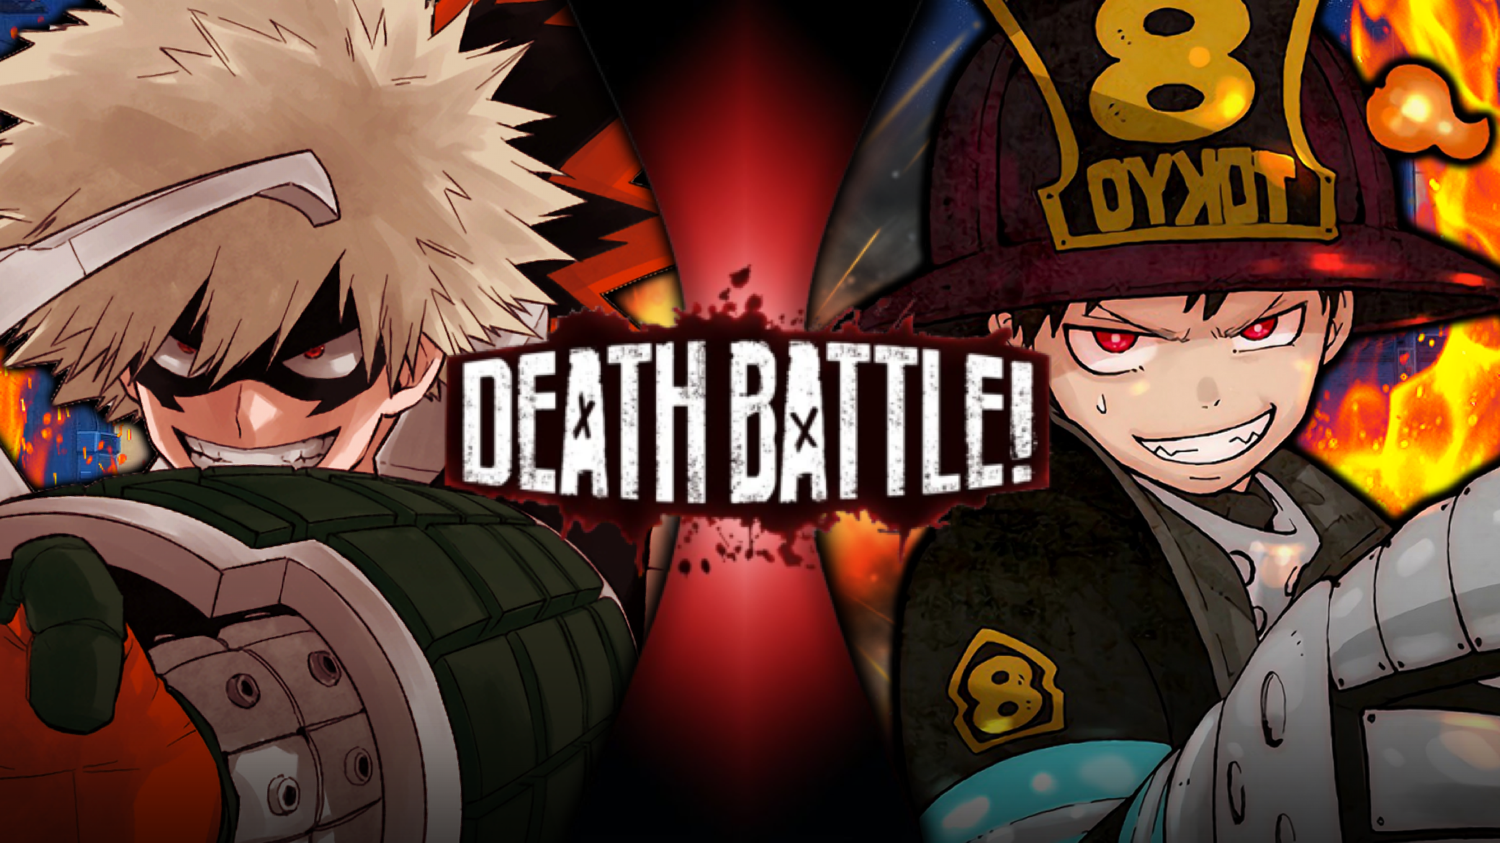 Bleach Realm Death Battle  an official Bleach 2D sidescrolling RPG is  now live on Android  GamerBraves